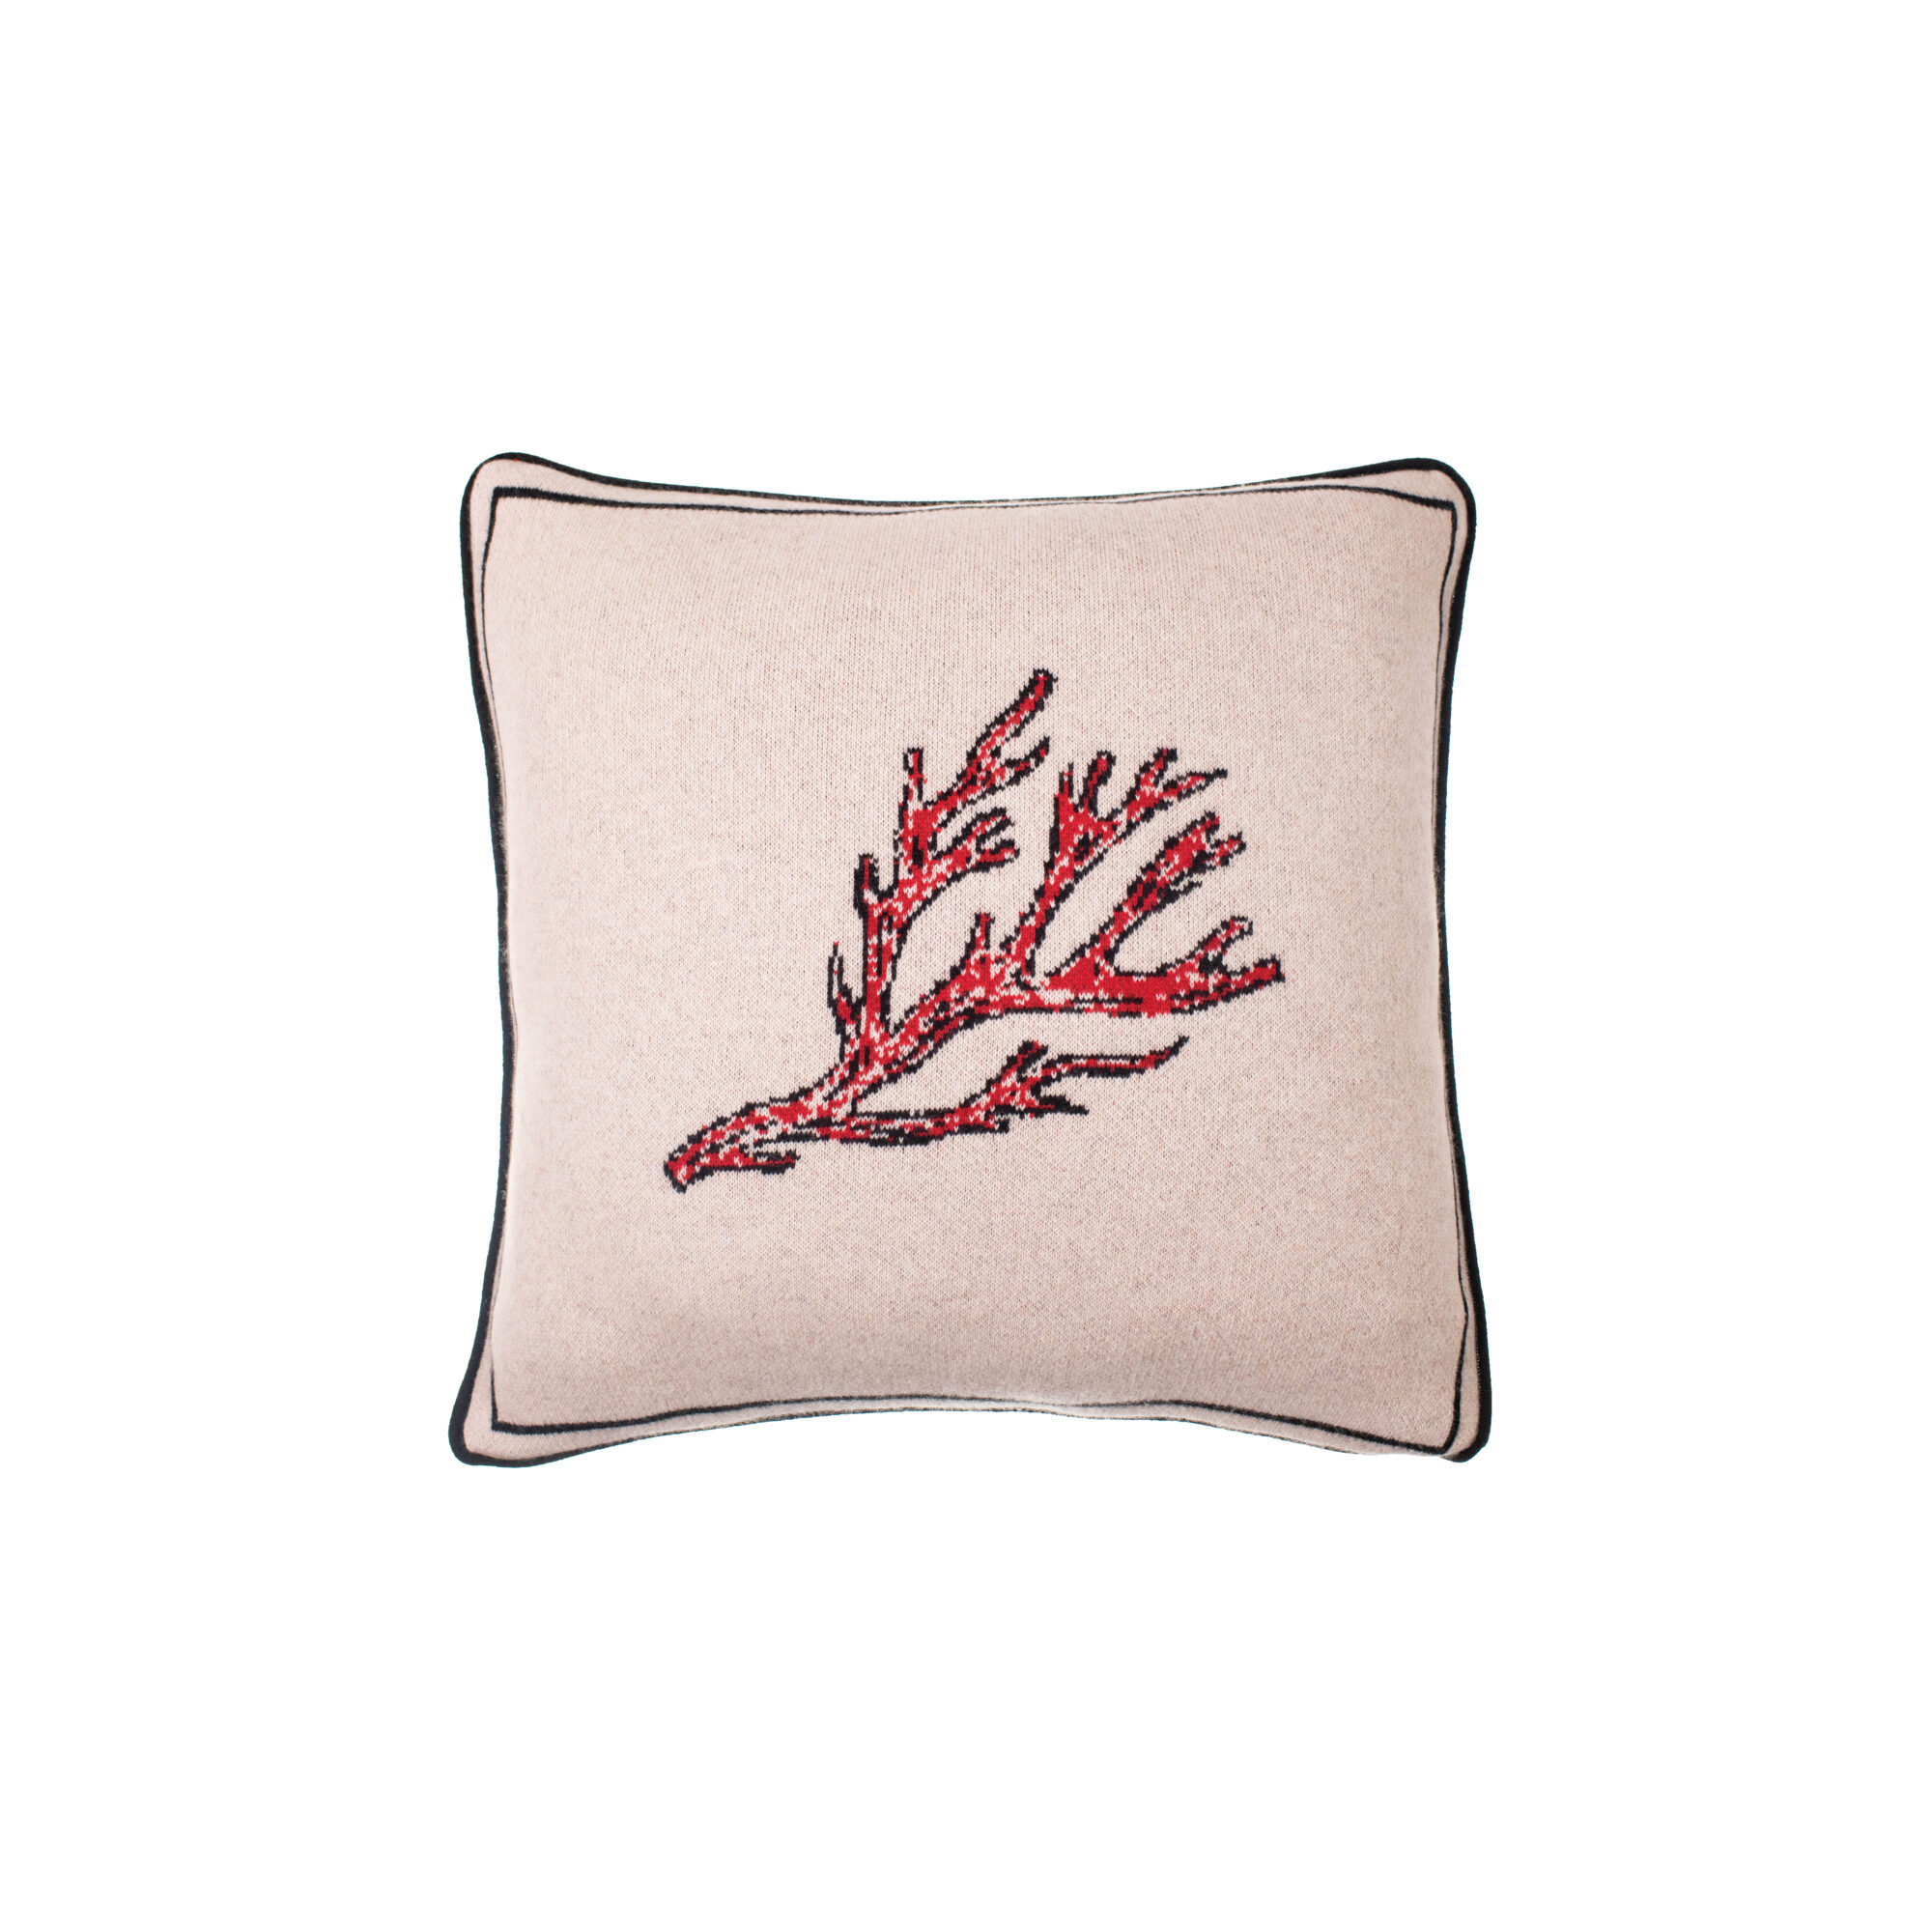 coral pillow